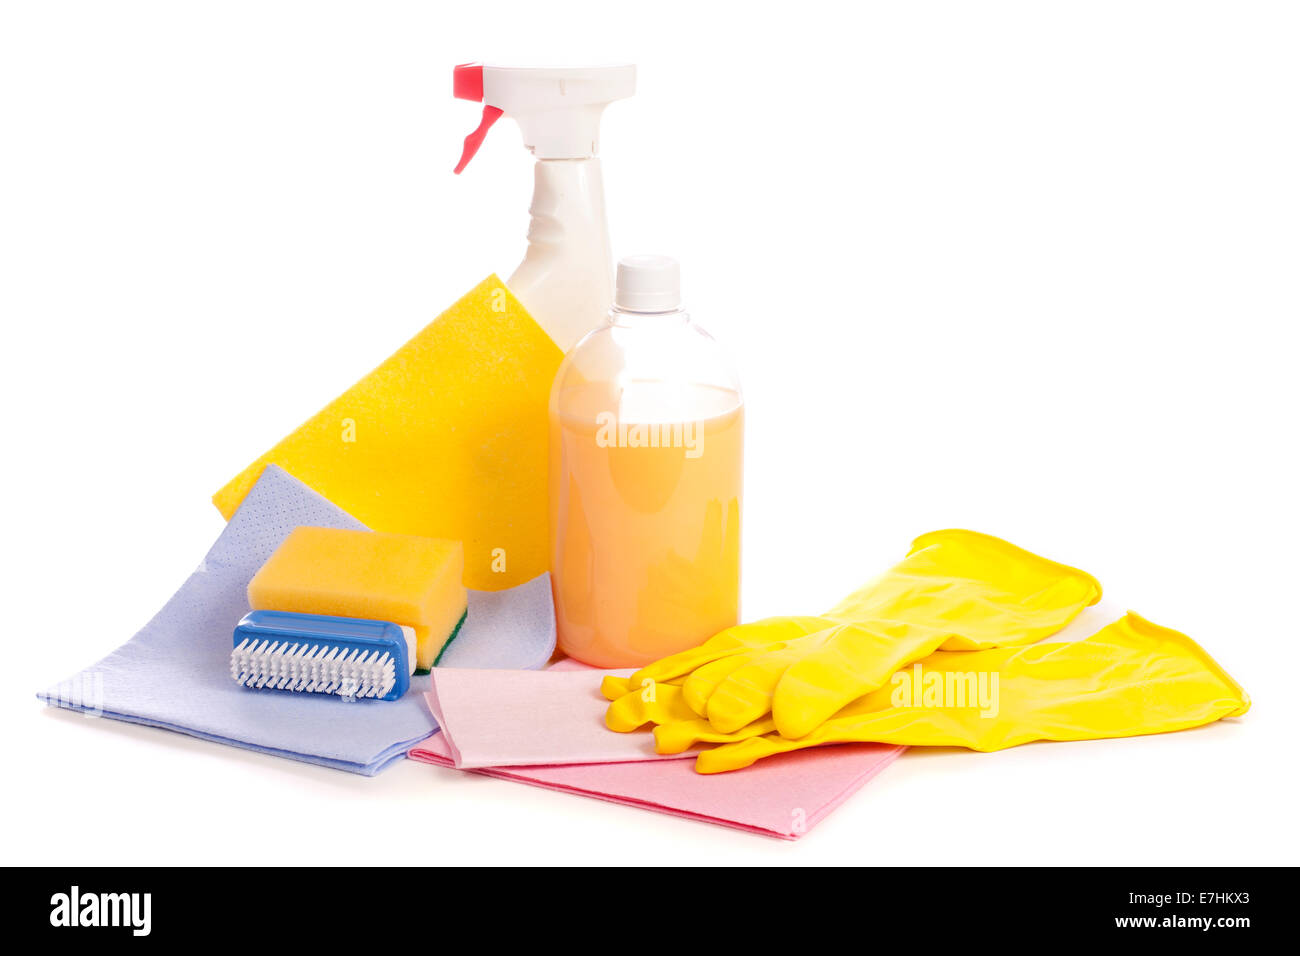 https://c8.alamy.com/comp/E7HKX3/house-cleaning-products-and-sponge-isolated-over-white-background-E7HKX3.jpg